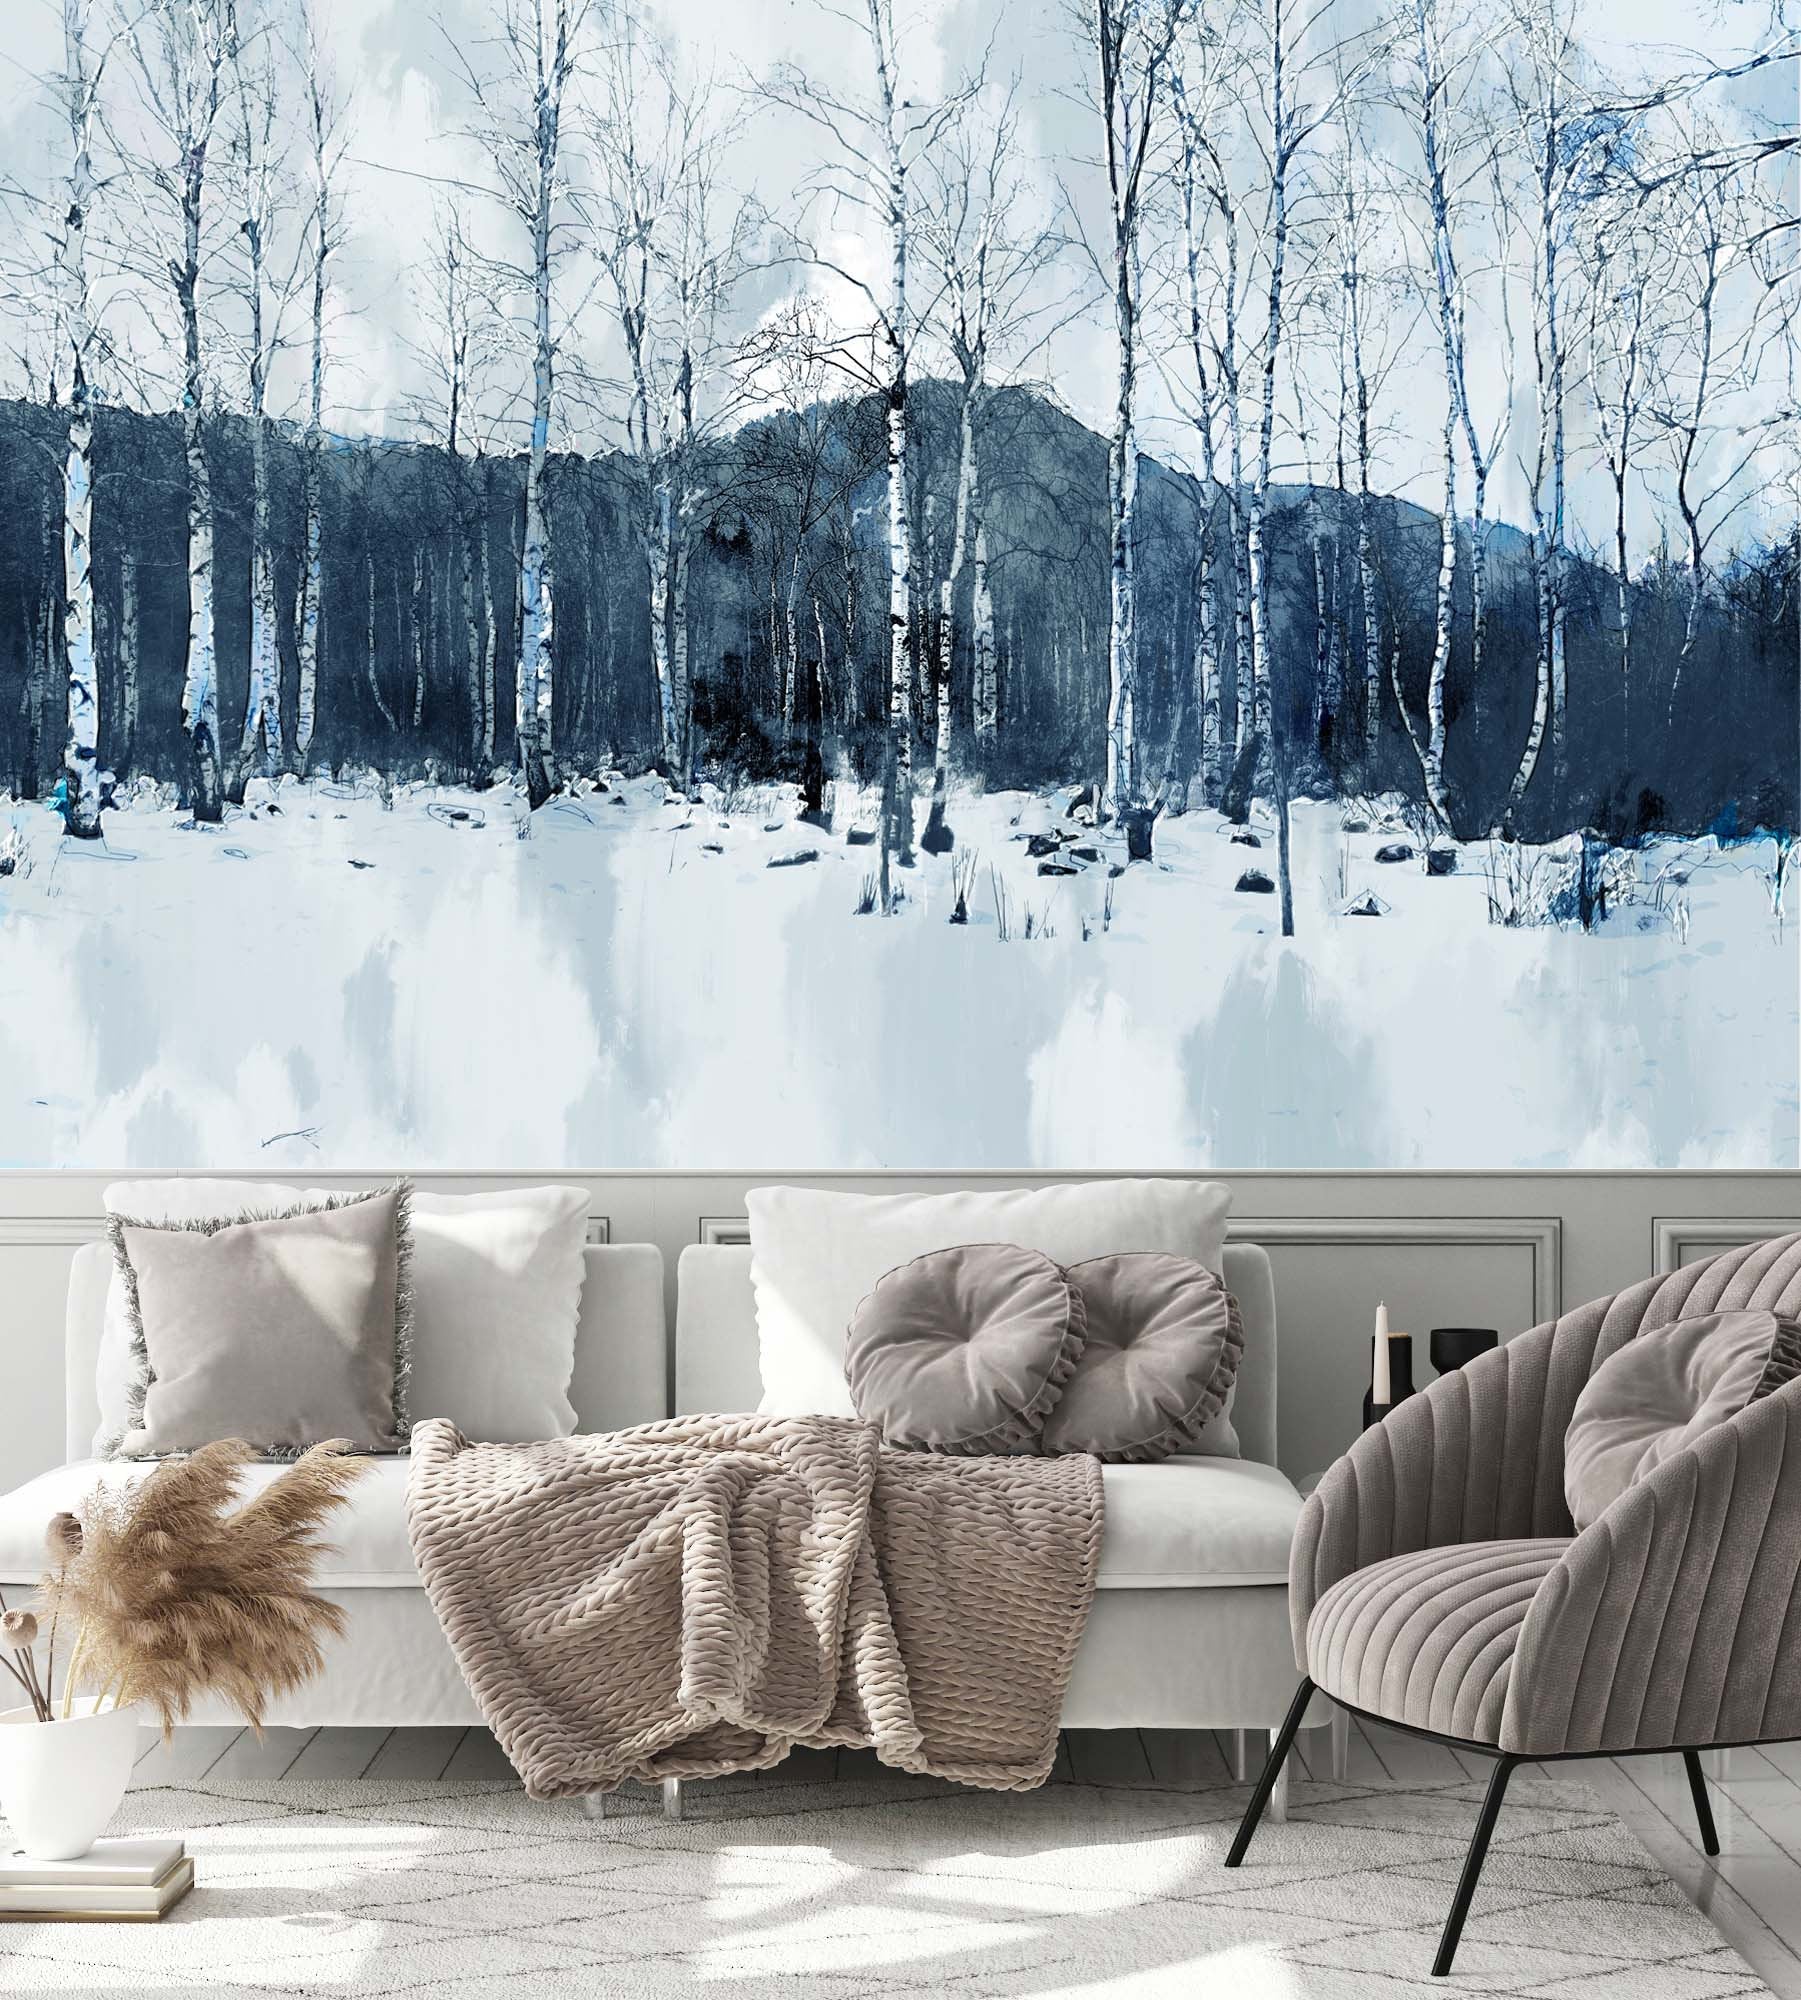 Abstract Trees in Winter Leaves Nature Wallpaper Cafe Restaurant Decoration Living Room Bedroom Wall Covering Mural Home Decor Art